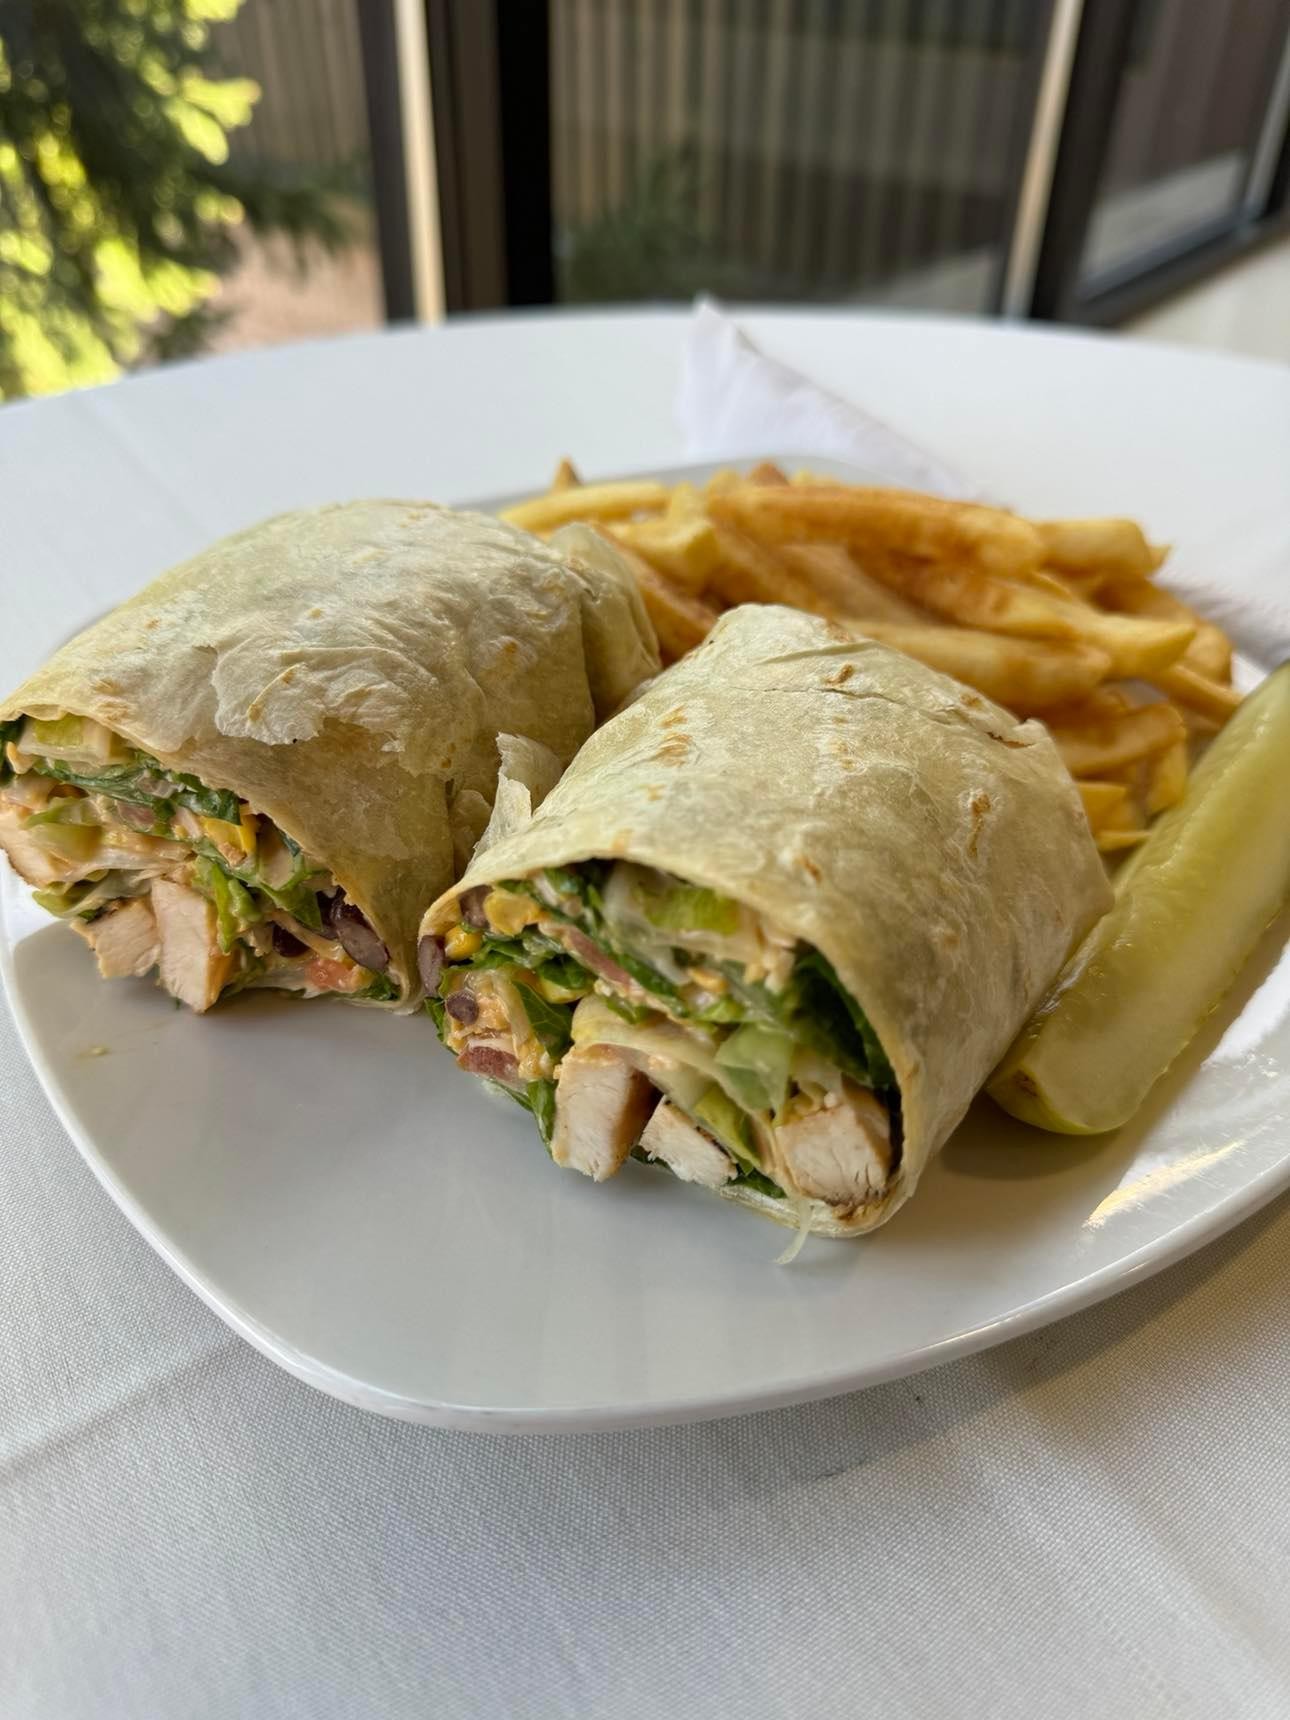 Southwestern Wrap and French Fries